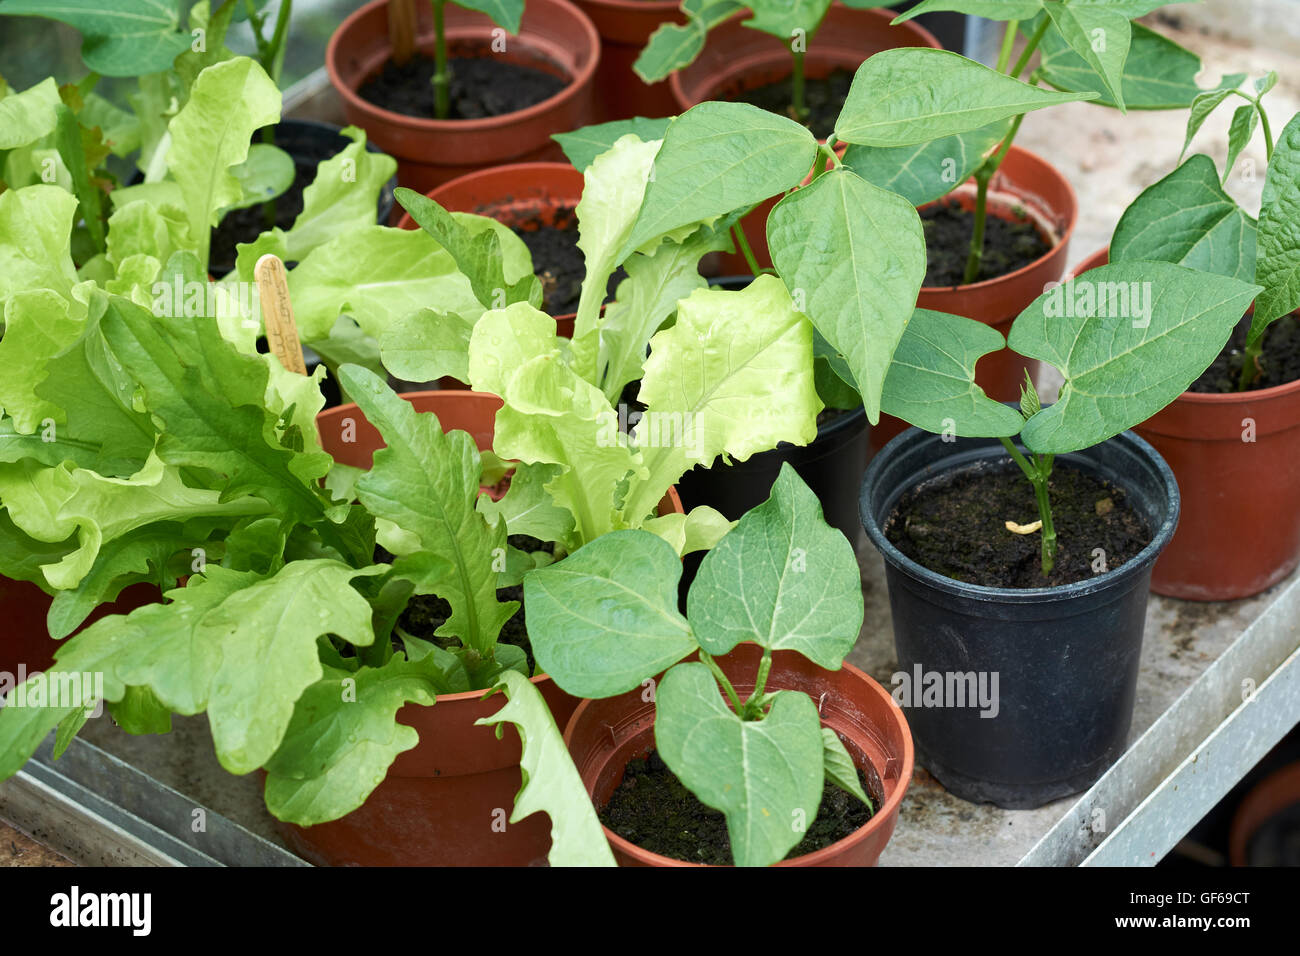 Young salad and green bean plants growing in plant pots in a greenhouse. Stock Photo